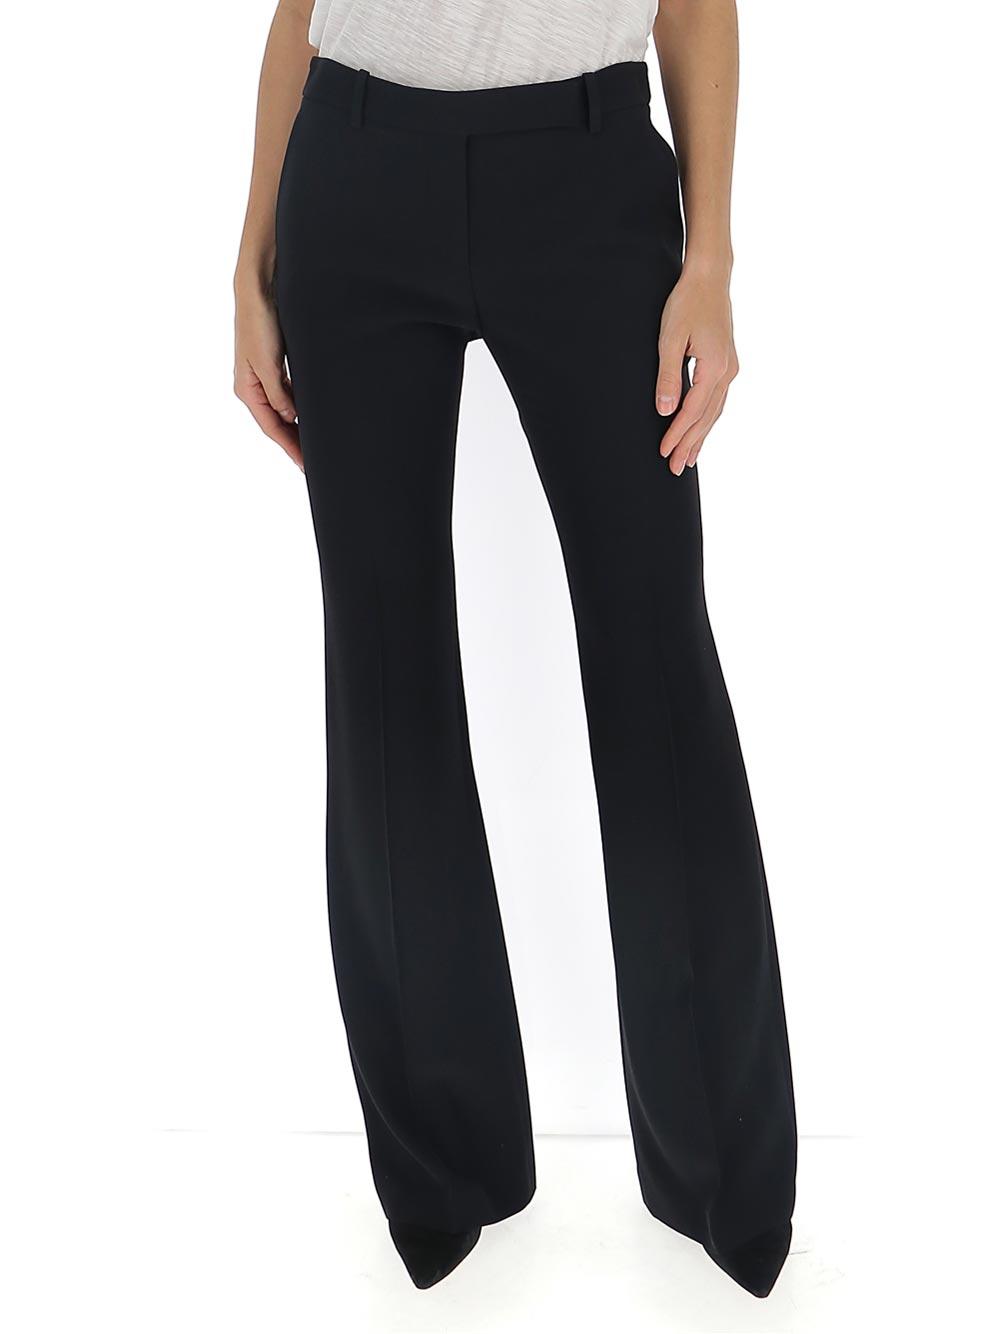 Alexander McQueen Synthetic Tailored Bootcut Pants in Black - Lyst